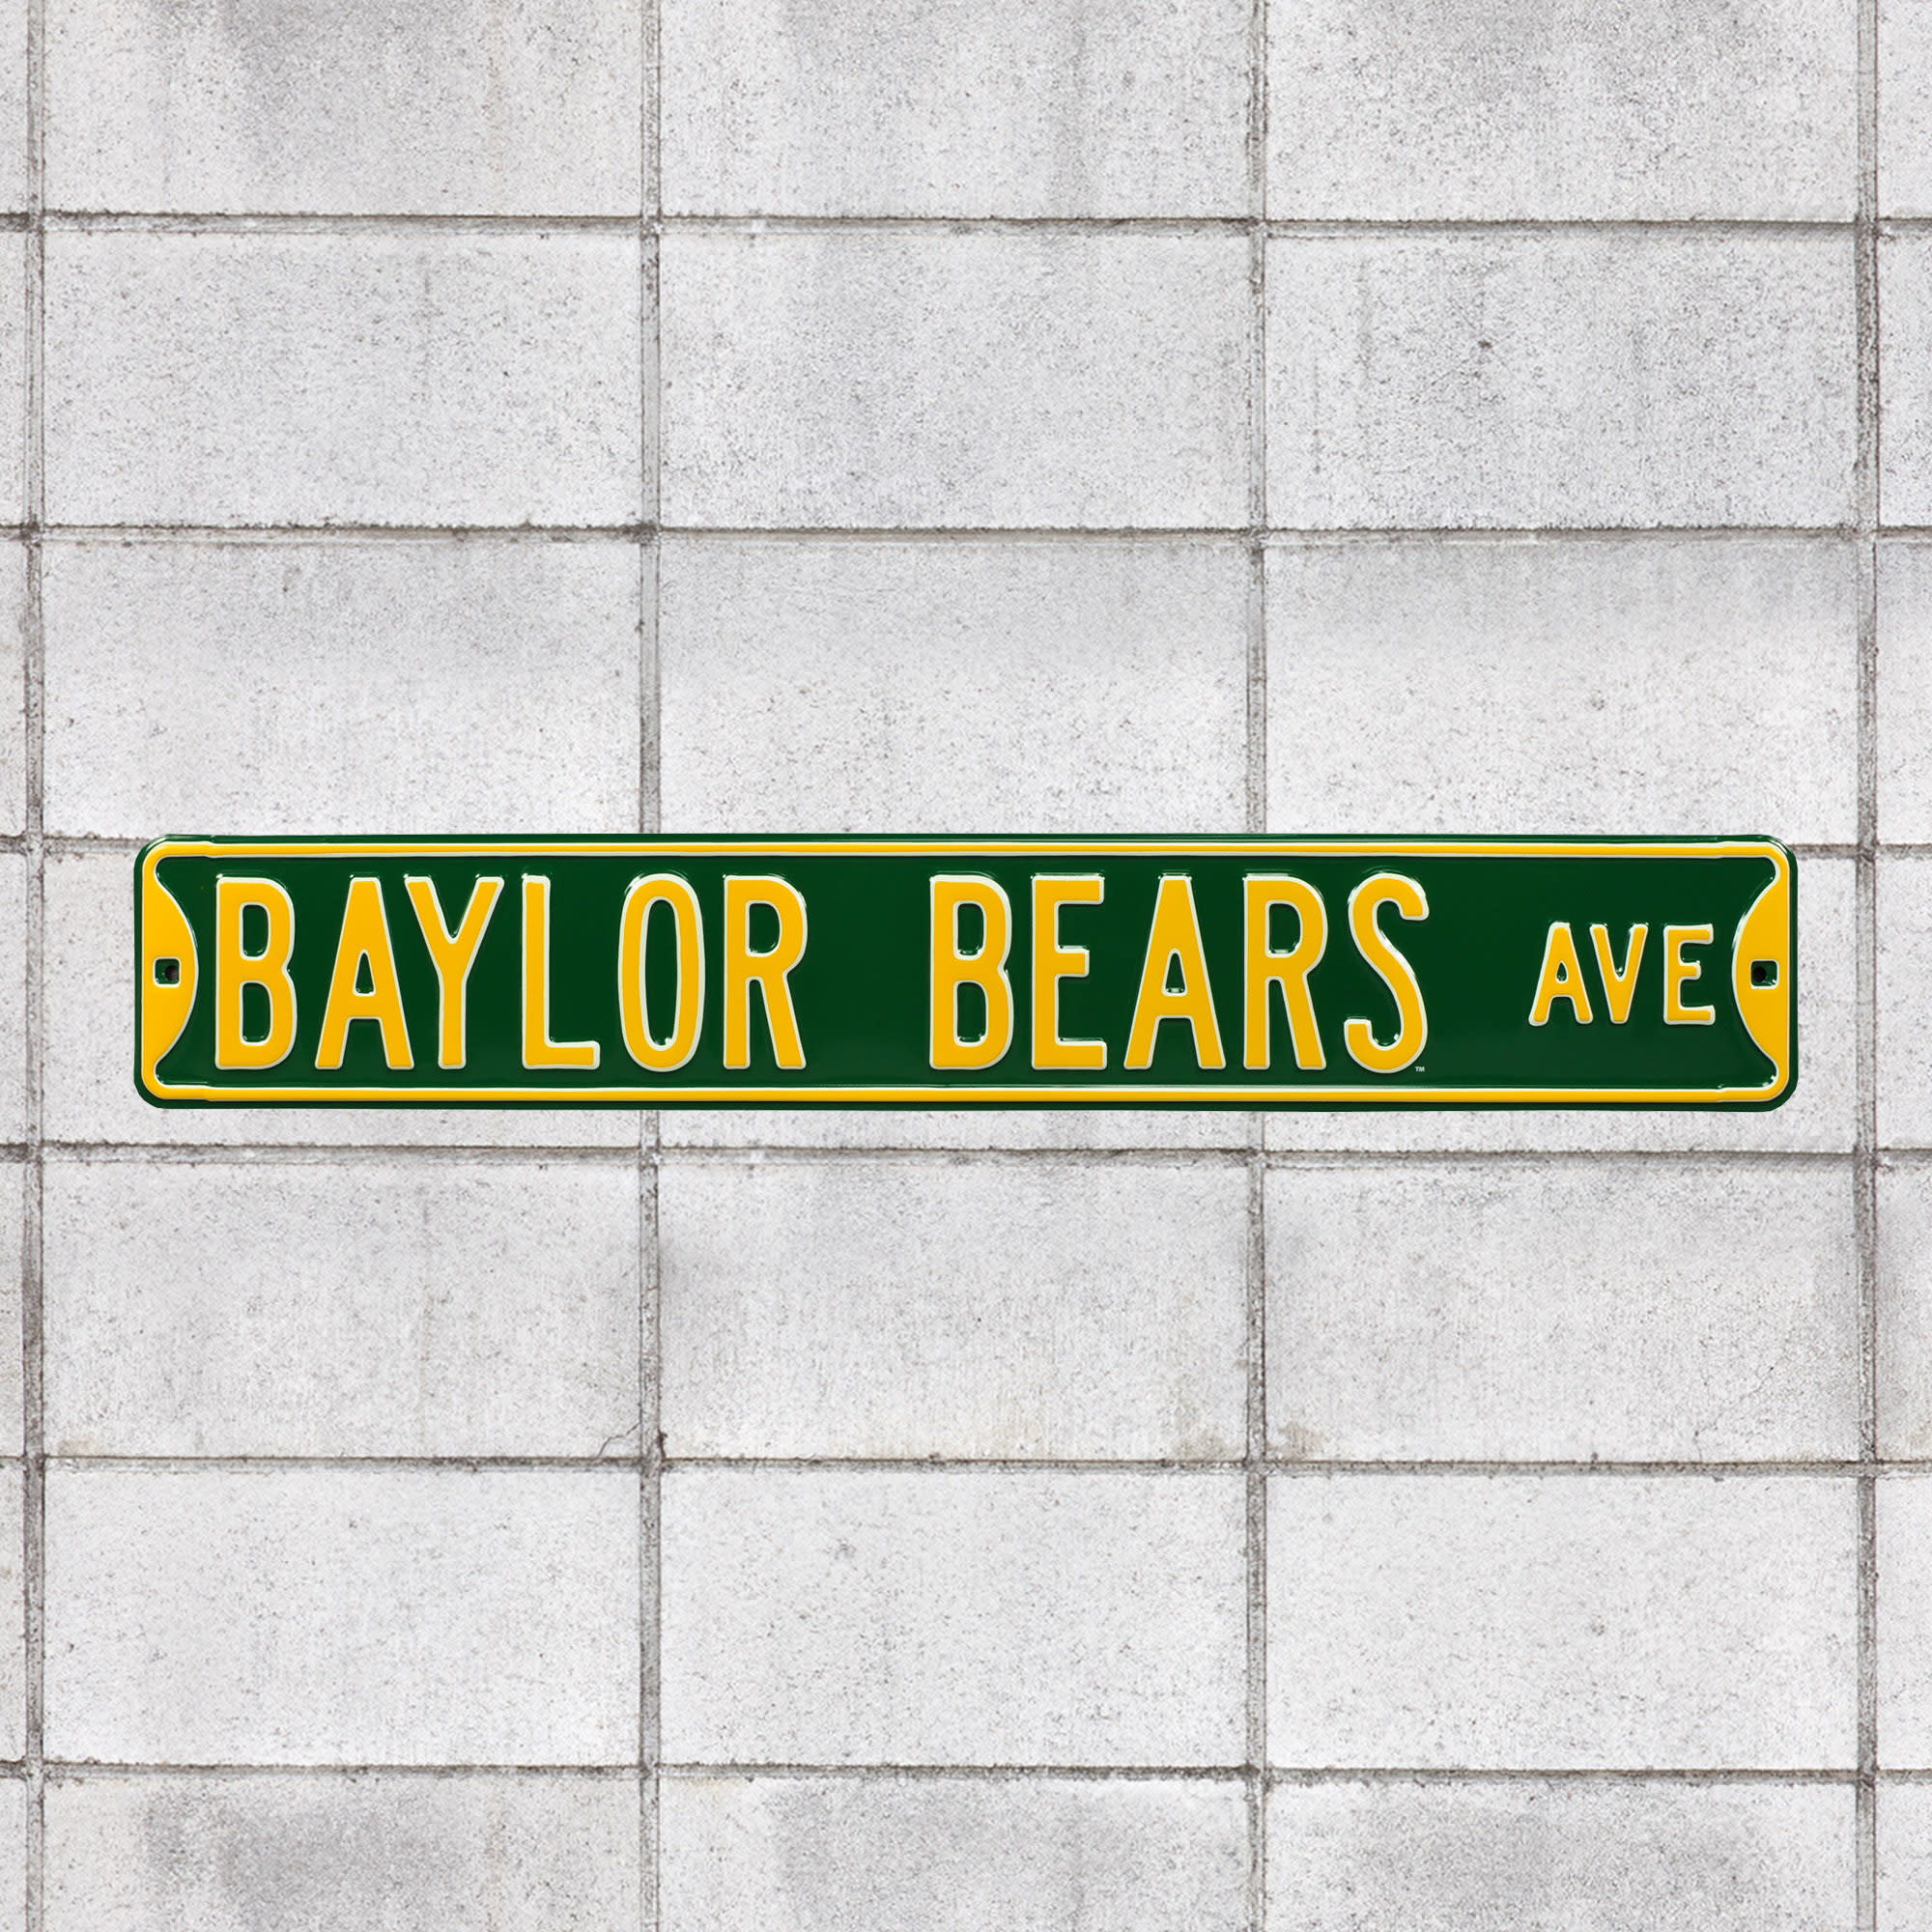 Baylor Bears: Baylor Bears Avenue - Officially Licensed Metal Street Sign by Fathead | 100% Steel